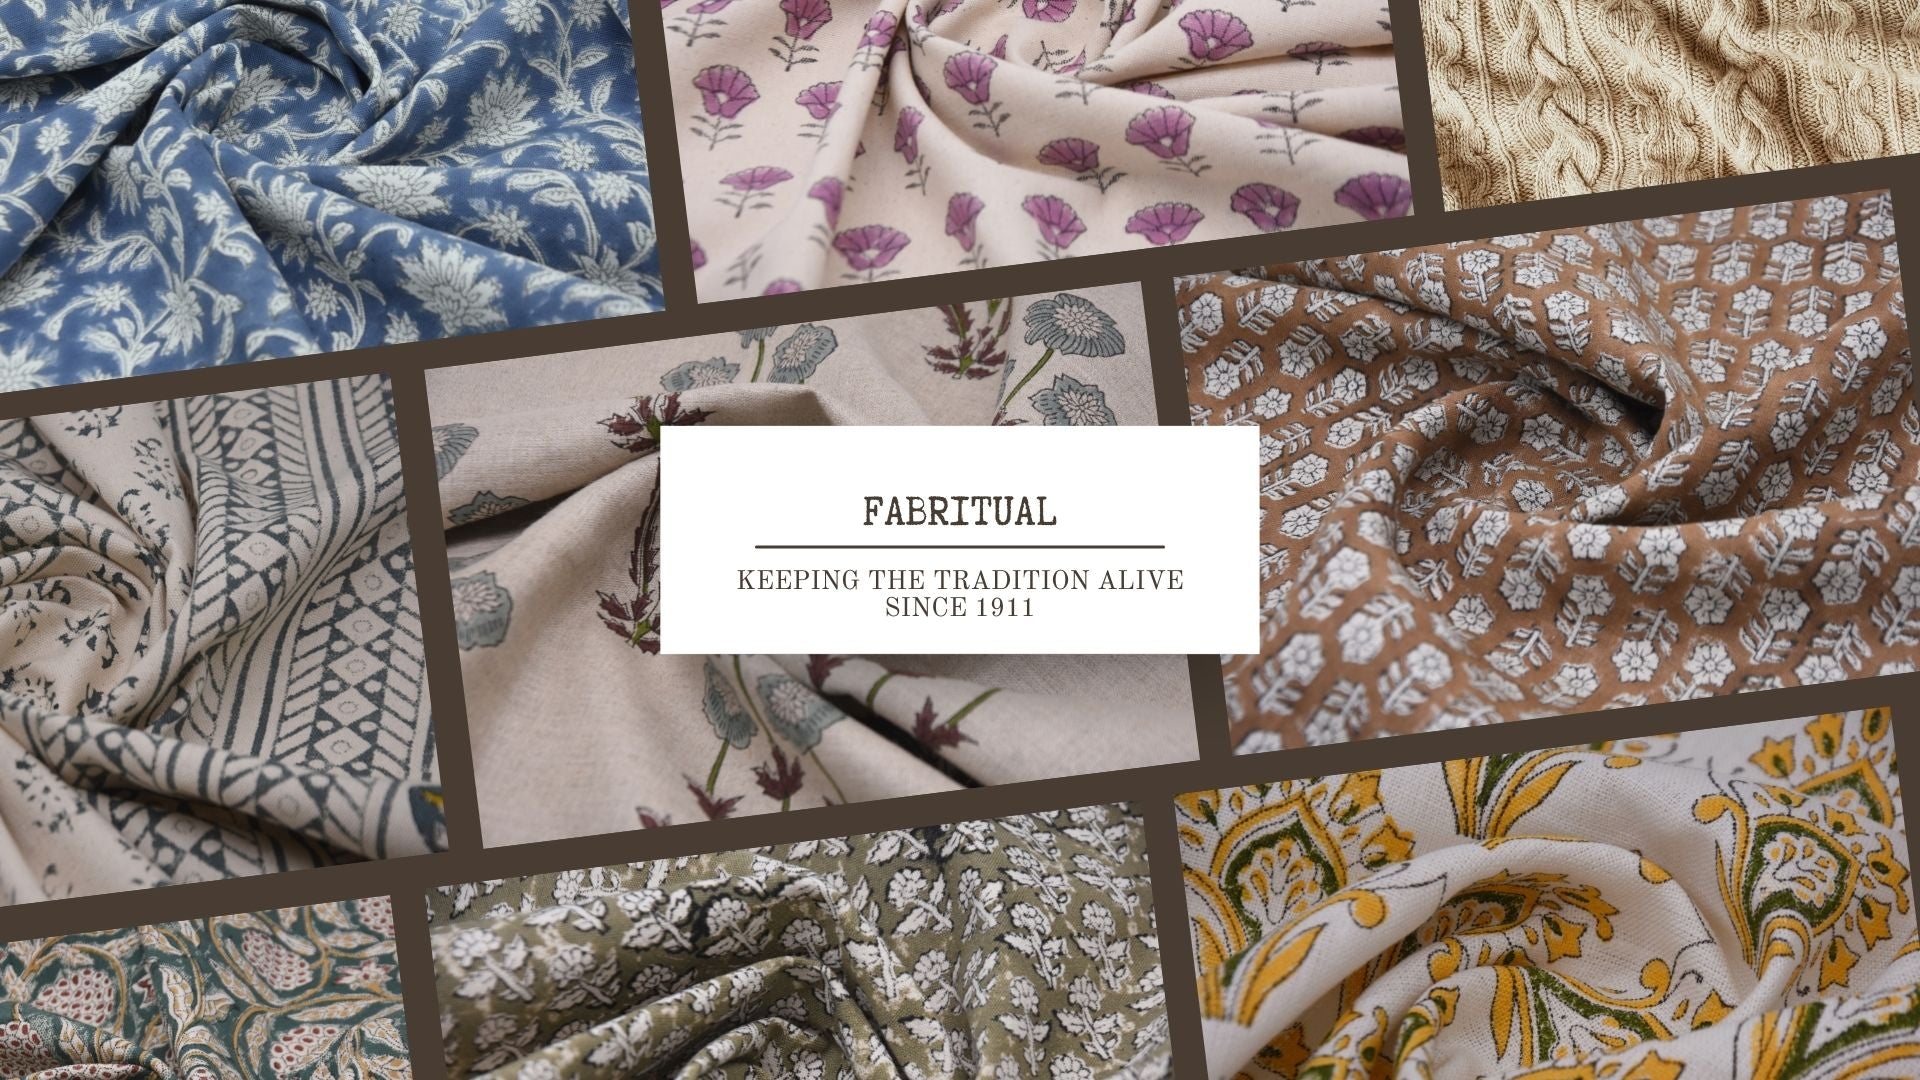 Floral Power: The Enduring Appeal of Floral Fabric - Fabritual